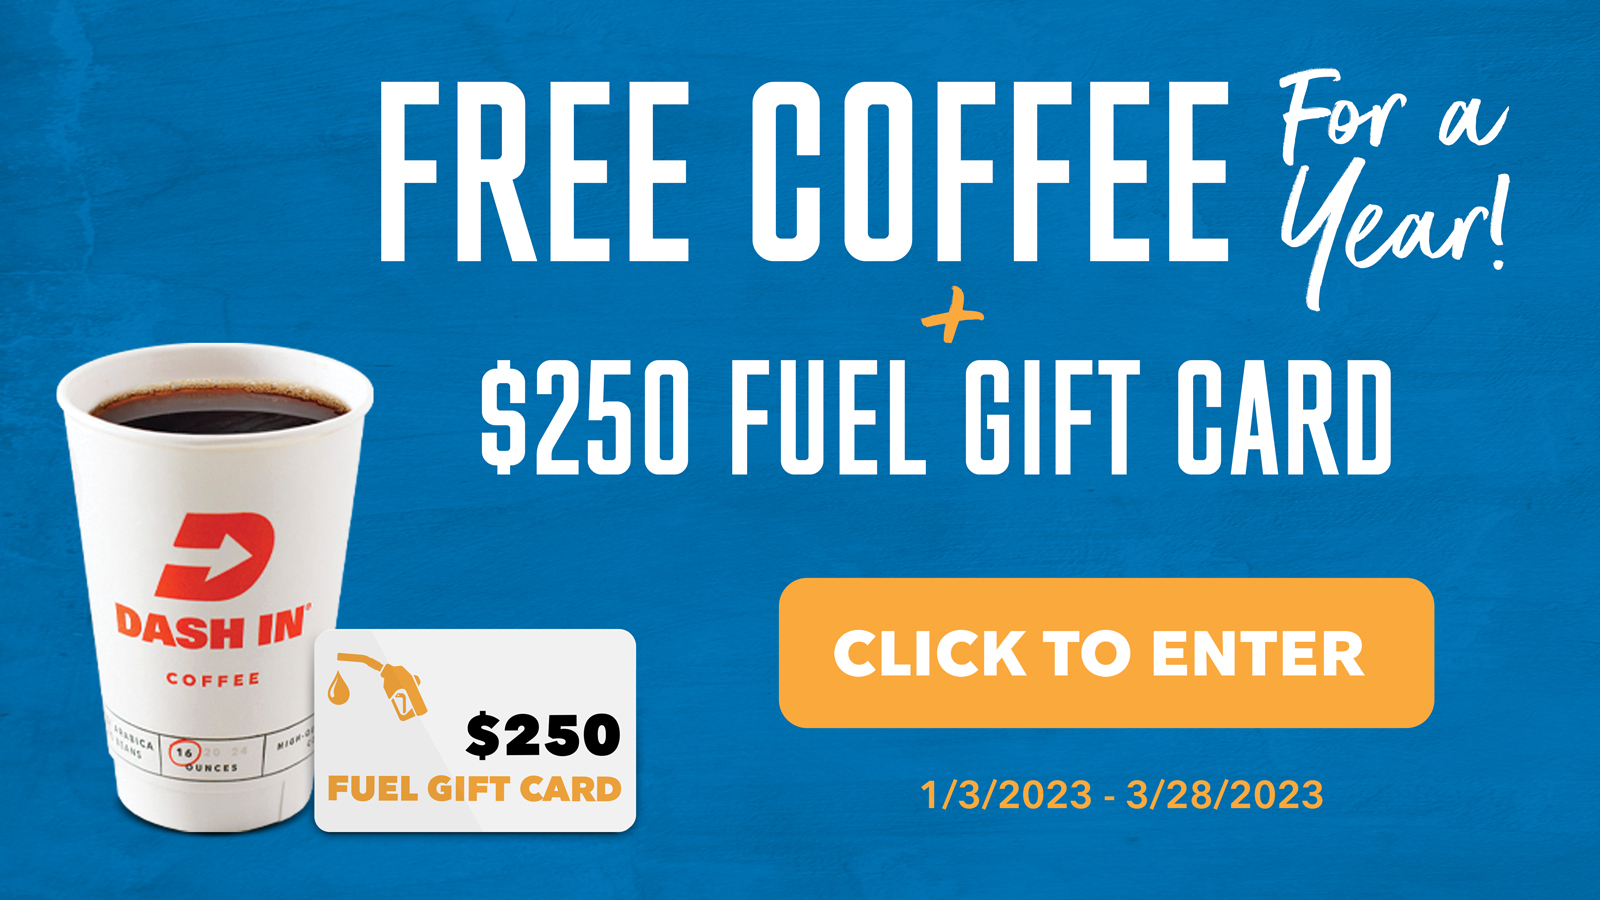 Free coffee for a year and $250 free fuel! Best gas station food in town!